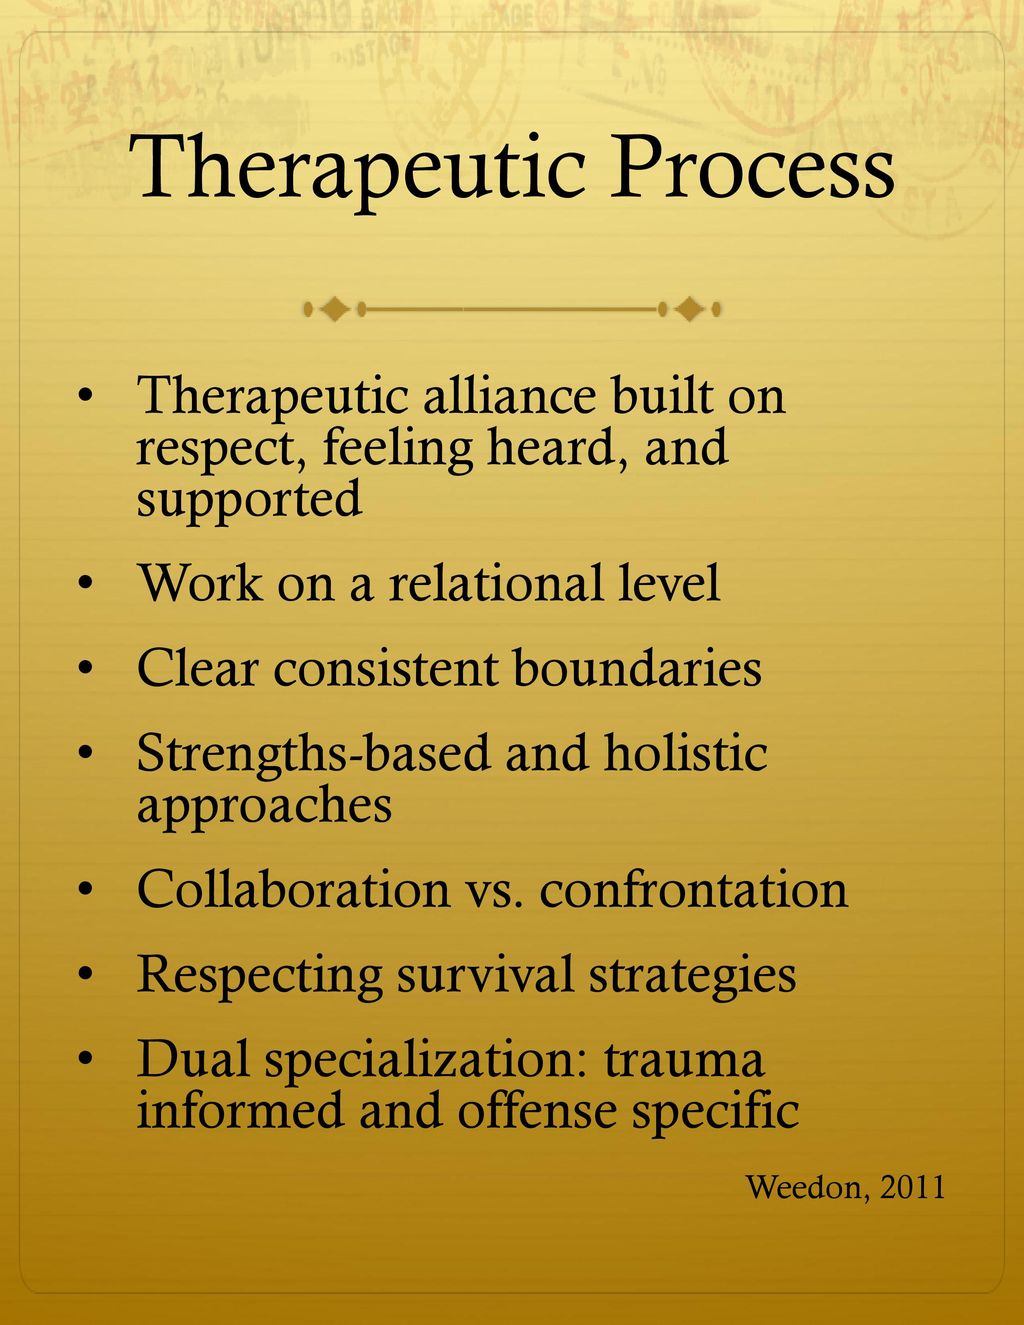 6/9/2018 Therapeutic Process. Therapeutic alliance built on respect, feeling heard, and supported.